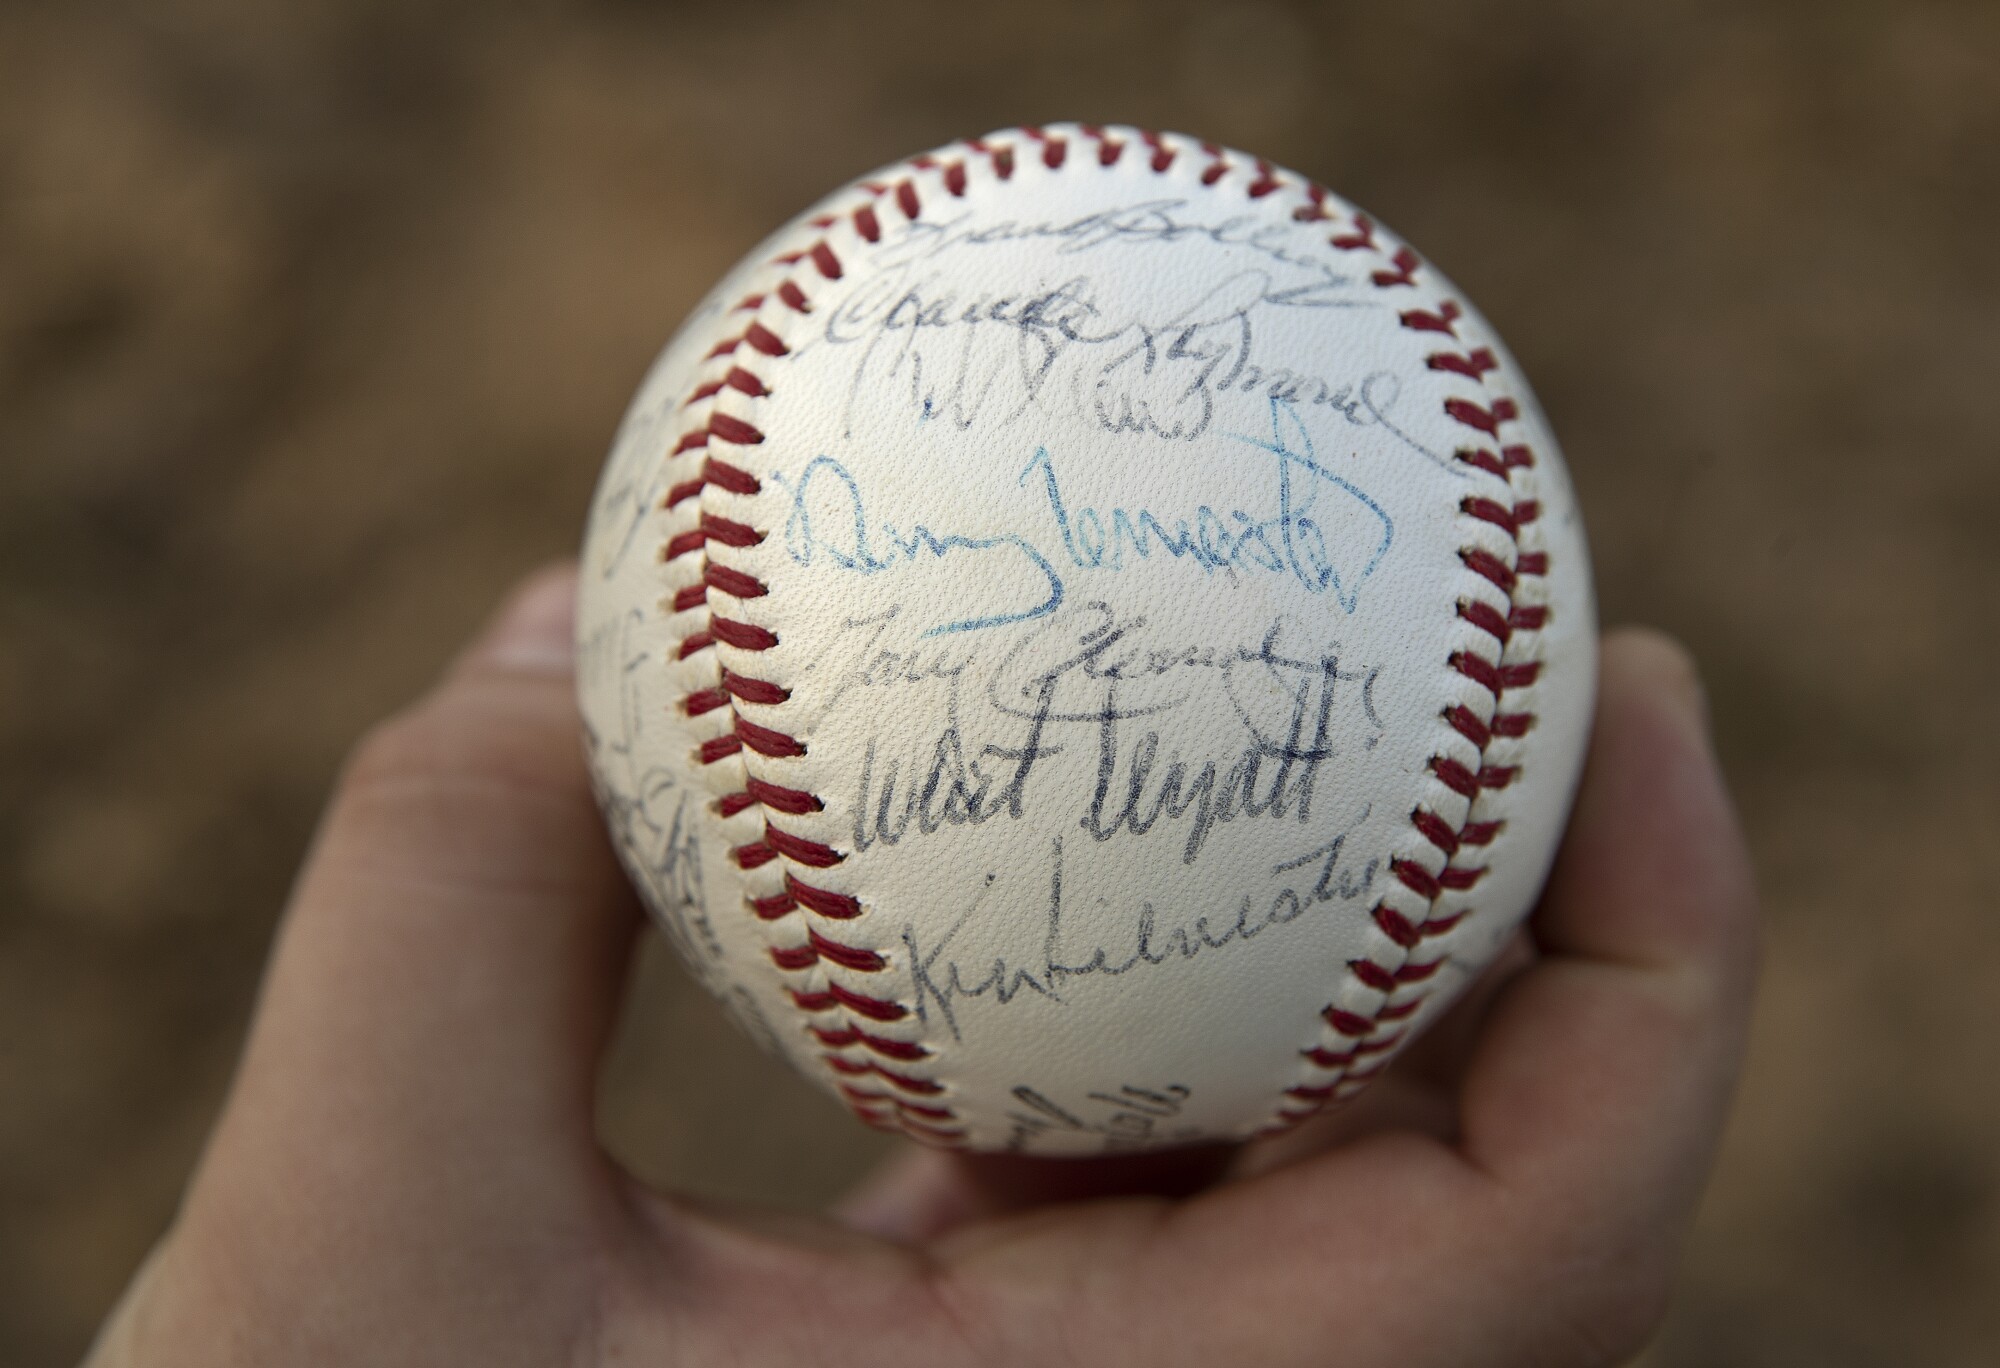 A baseball signed by the 1963 Milwaukee Braves includes the signatures of hall of famers.